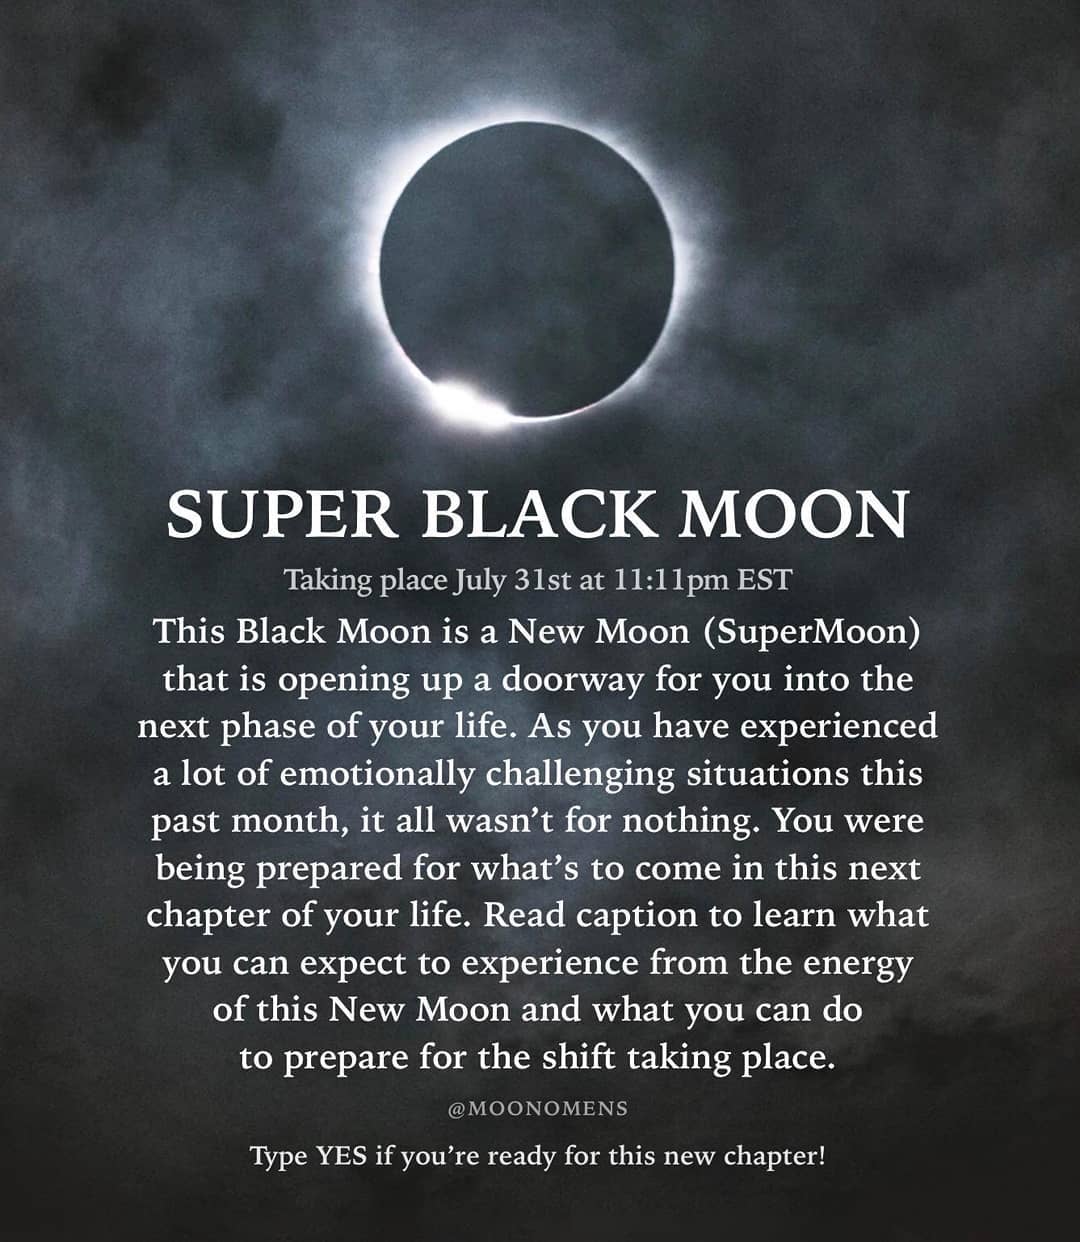 SUPER BLACK MOON
Taking place July 31st at 11:11pm EST
This Black Moon is a New Moon (SuperMoon)
that is opening up a doorway for you into the
phase of your life. As you have experienced
lot of emotionally challenging situations this
past month, it all wasn't for nothing. You were
being prepared for what's to come in this next
chapter of your life. Read caption to learn what
next
a
experience from the energy
you can expect to
of this New Moon and what you can do
to prepare for the shift taking place.
@MOONOMENS
Type YES if you're ready for this new
chapter!
